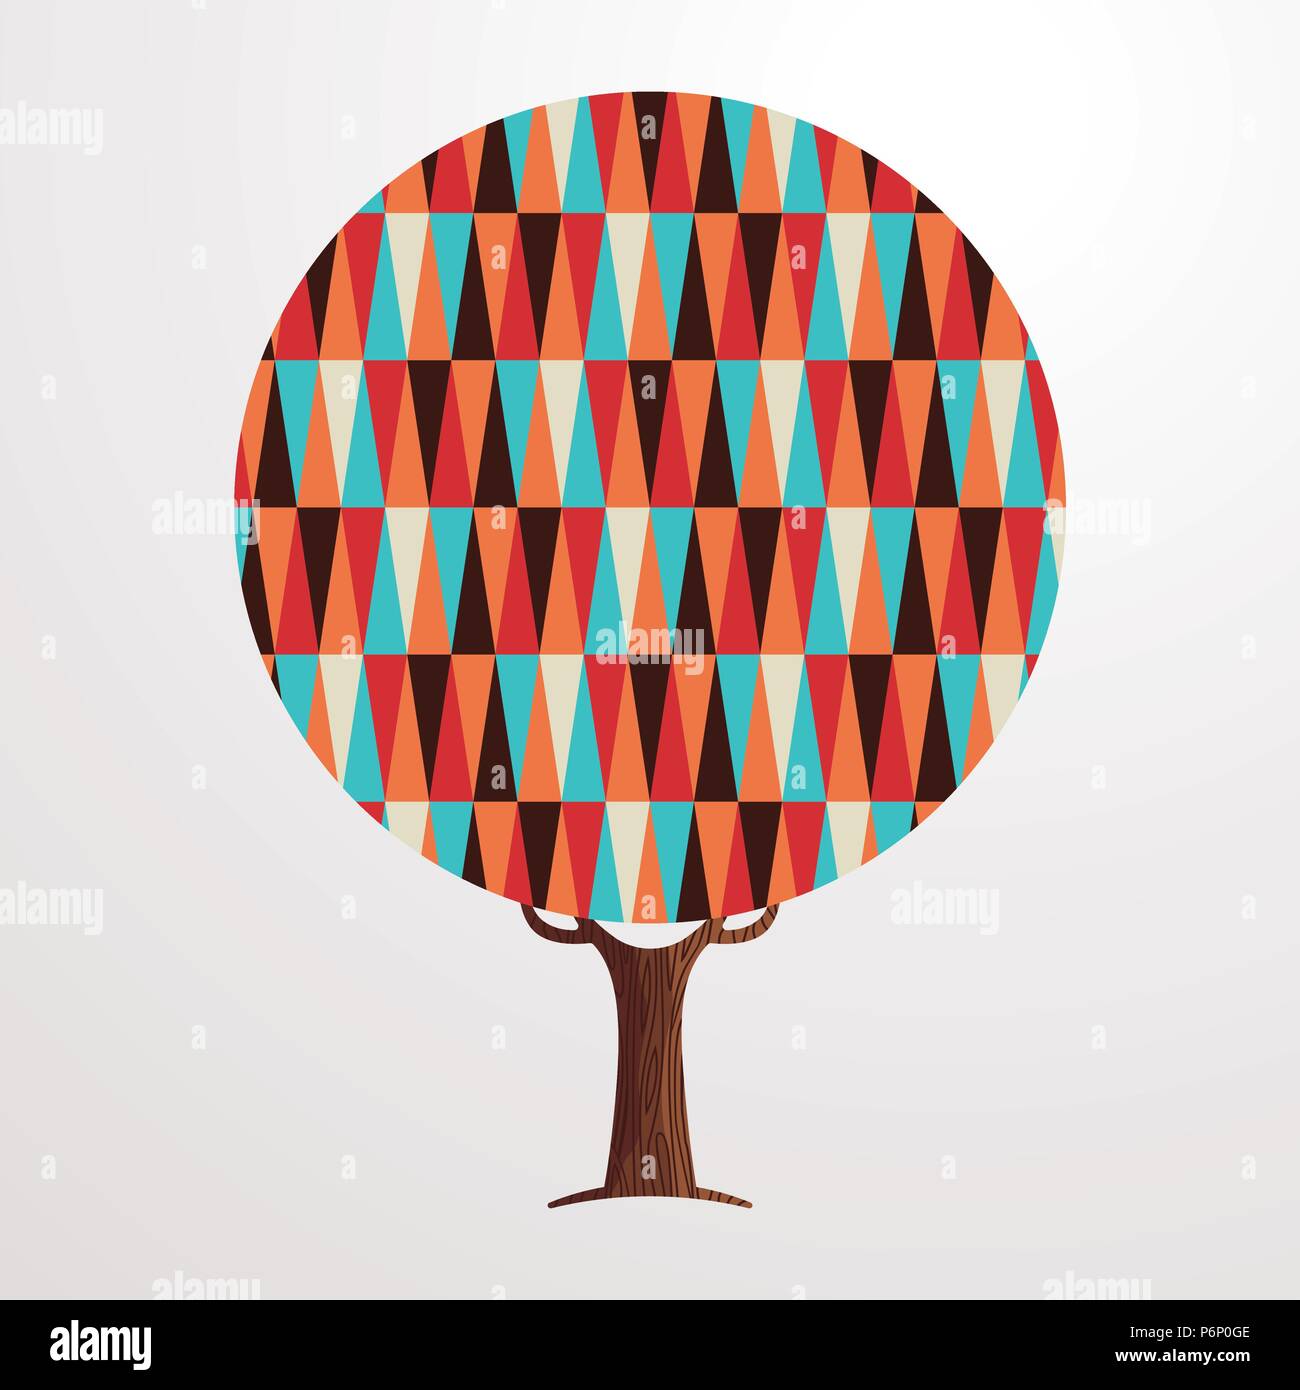 Tree made of colorful abstract shapes. Retro color geometric symbols for fun conceptual idea. EPS10 vector. Stock Vector